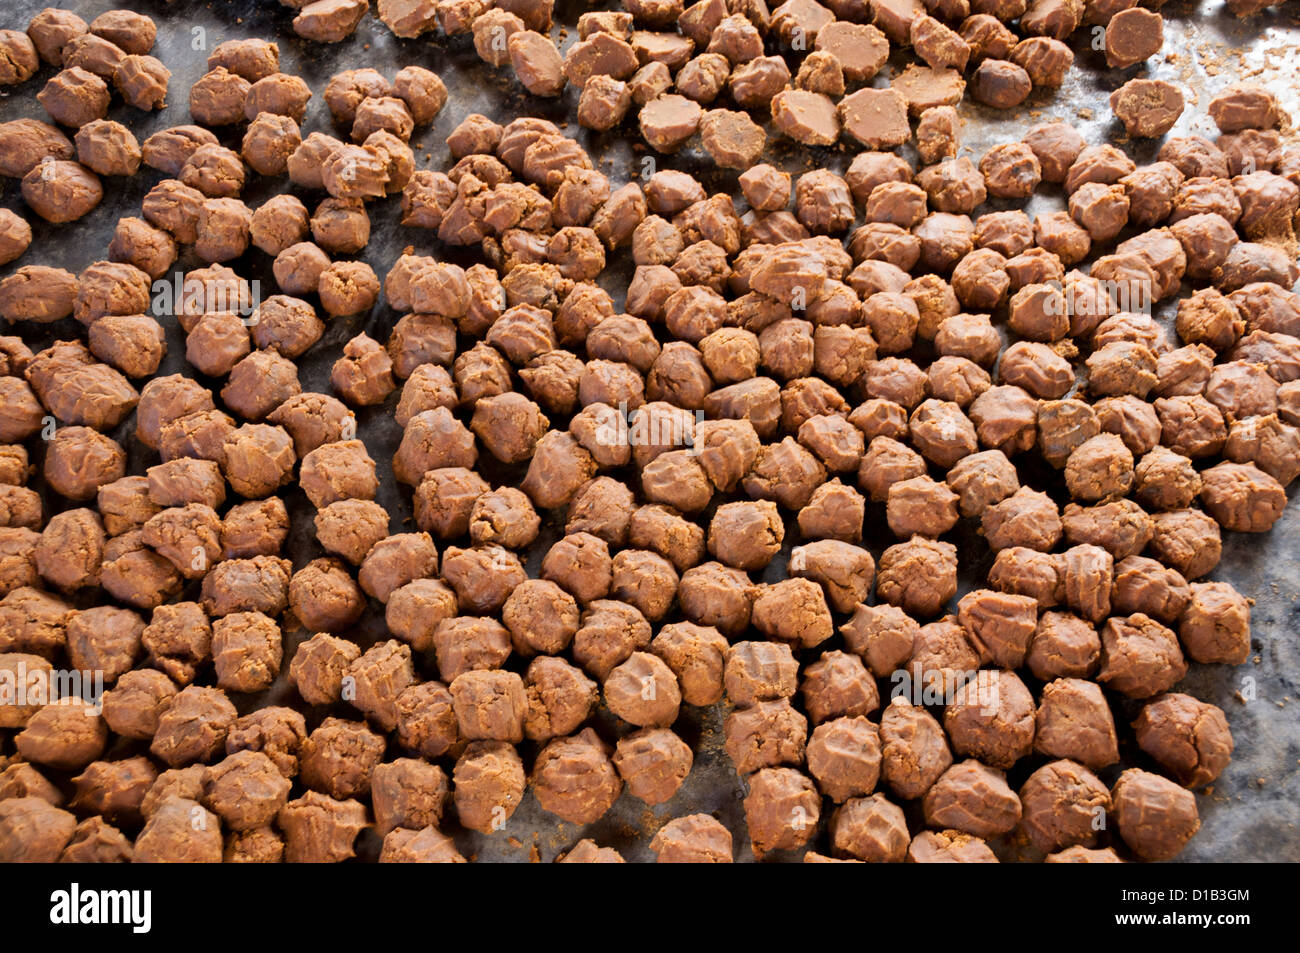 Jaggery balls produced from sugar cane juice Stock Photo